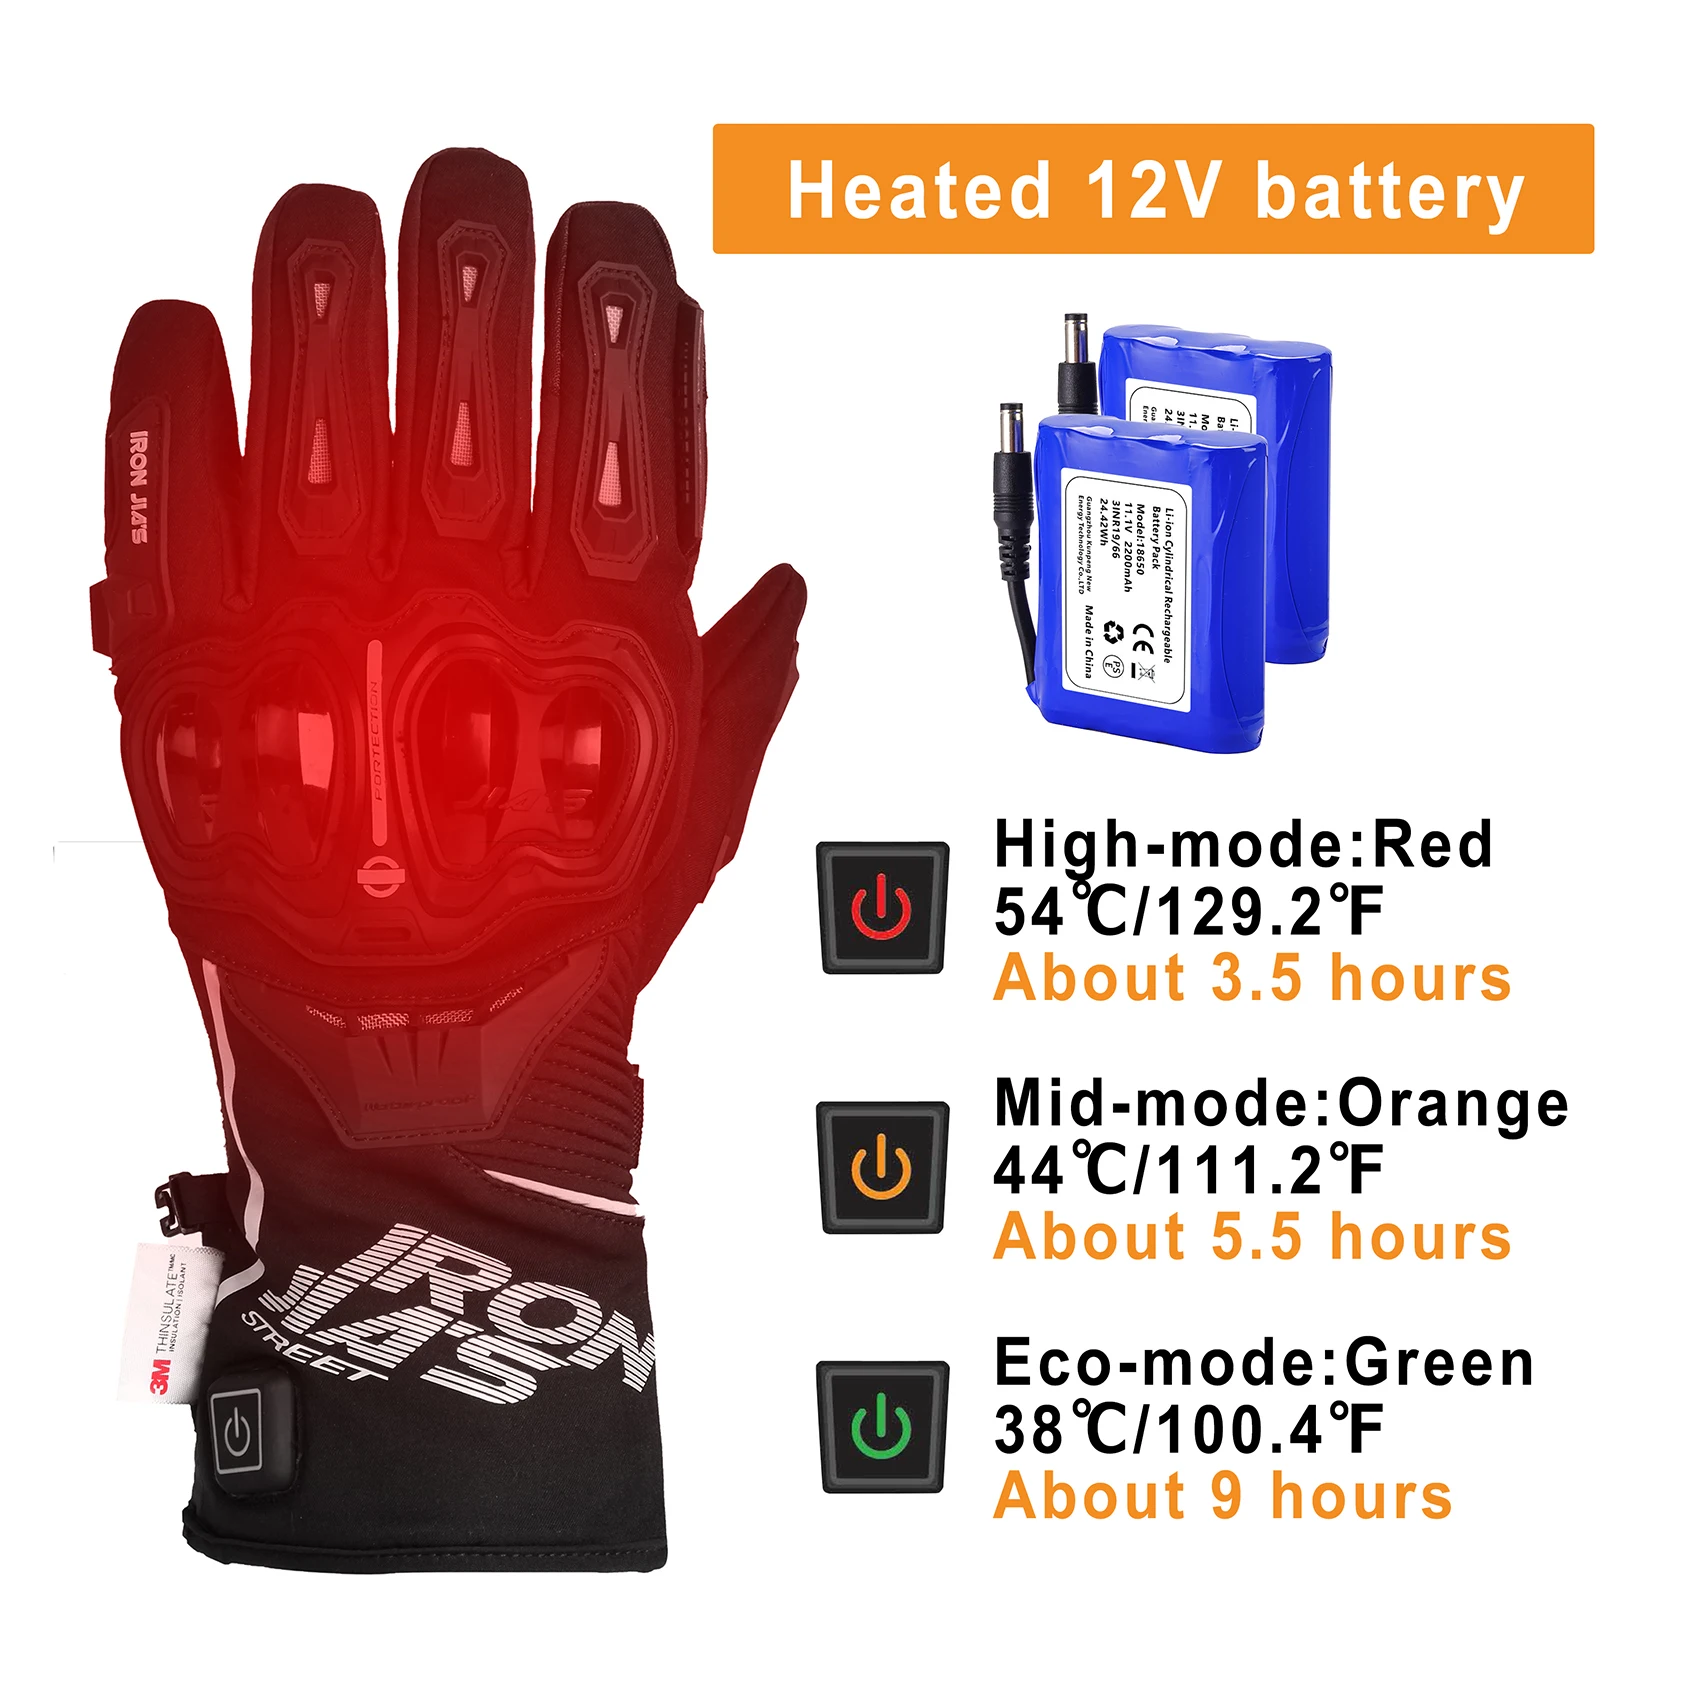 IRON JIA'S Heated Motorcycle Gloves Touch Screen Winter Moto Heated 12V Vehicle Battery Powered Gloves Snowboarding Motorbike enlarge